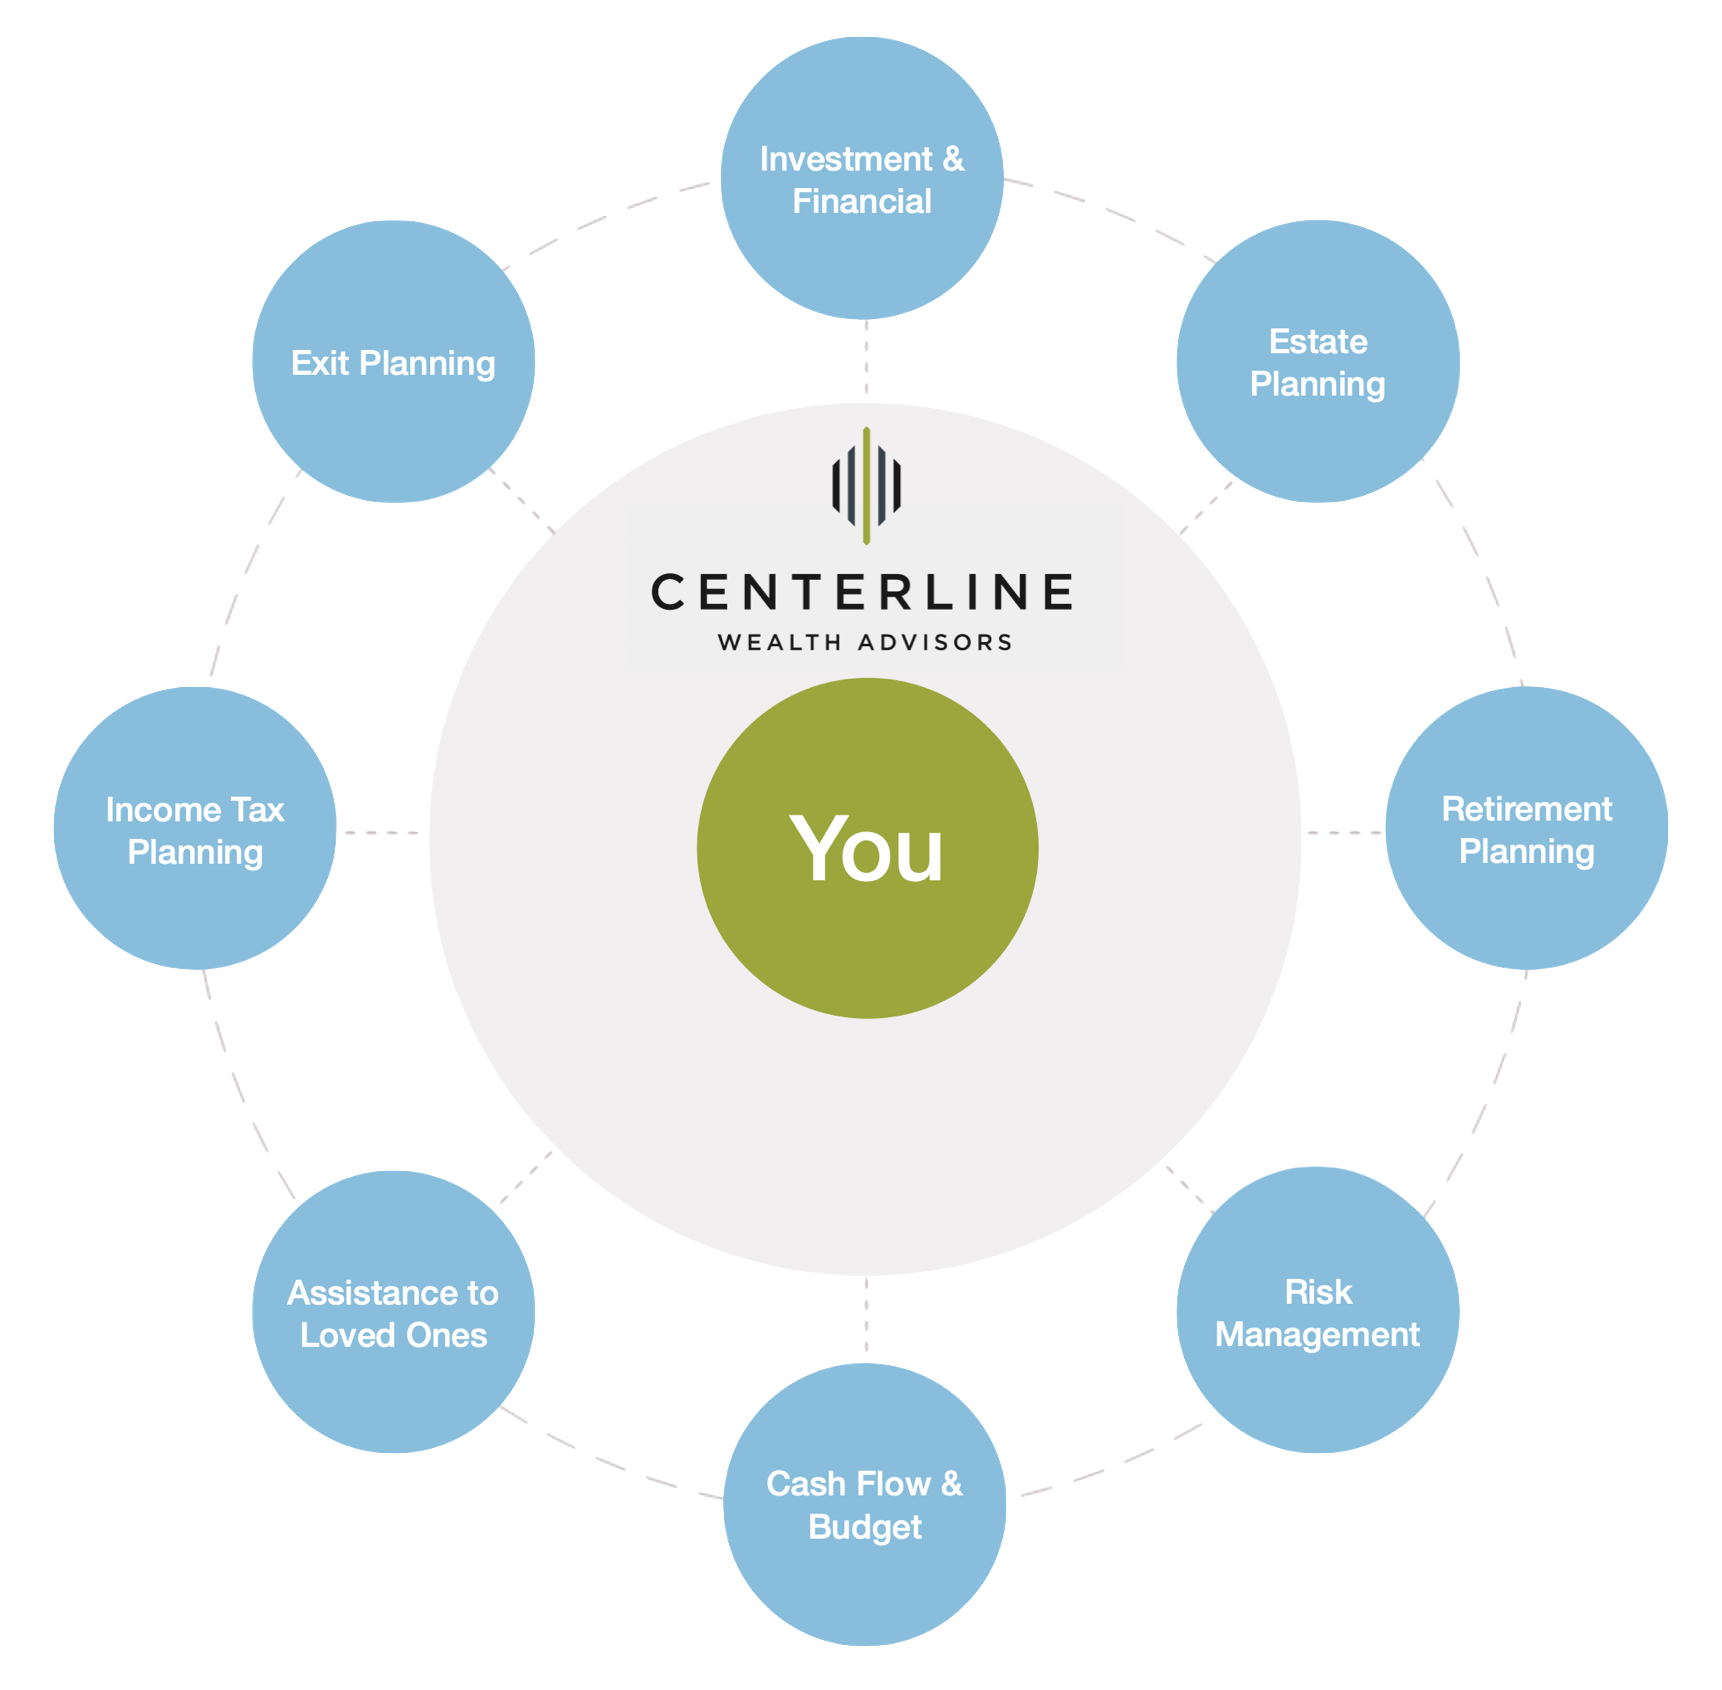 Centerline's Core Services: Investment and Financial, Estate Planning, Retirement Planning, Risk Management, Cash Flow and Budget, Assistance to Loved Ones, Income Tax Planning, and Exit Planning